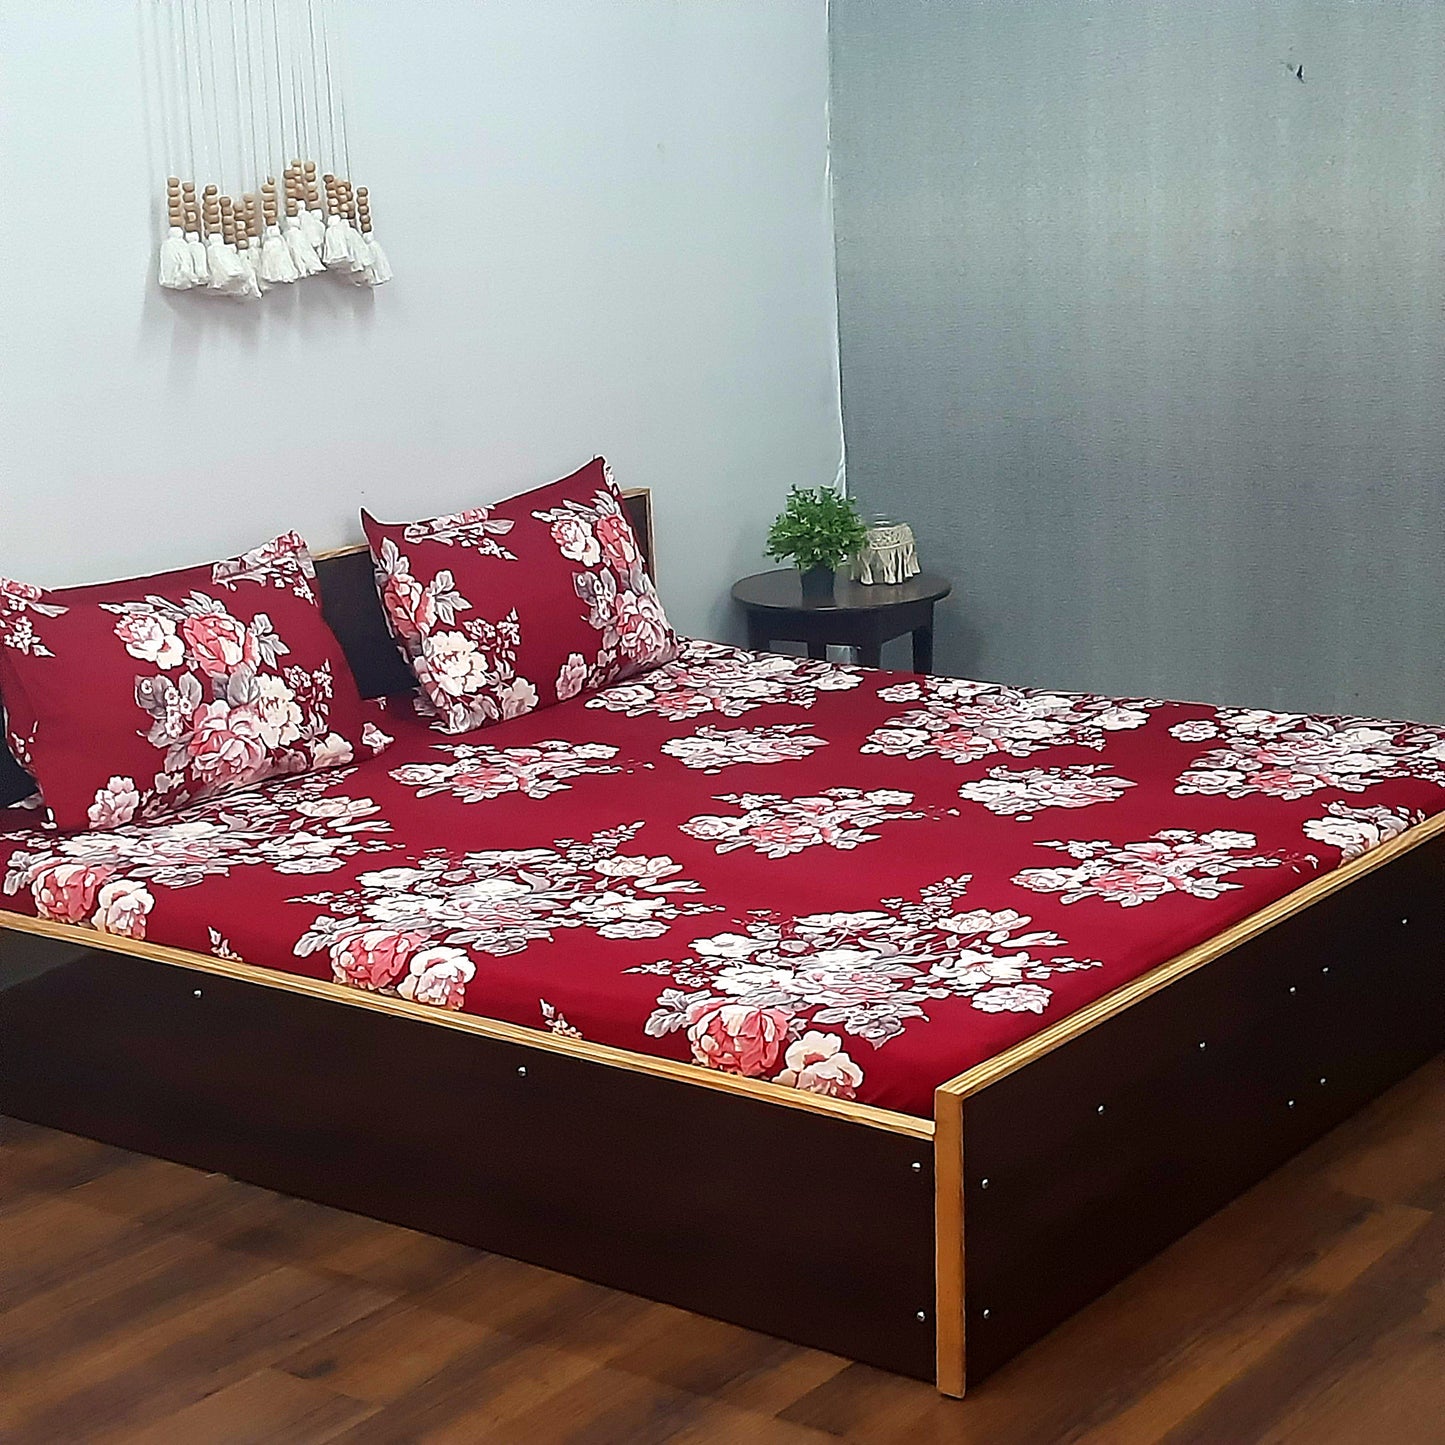 Avioni Home's Creta Premium Heavy Glaze cotton Elastic Fitted King Size Bedsheet with 2 Pillow Covers | Red floral design